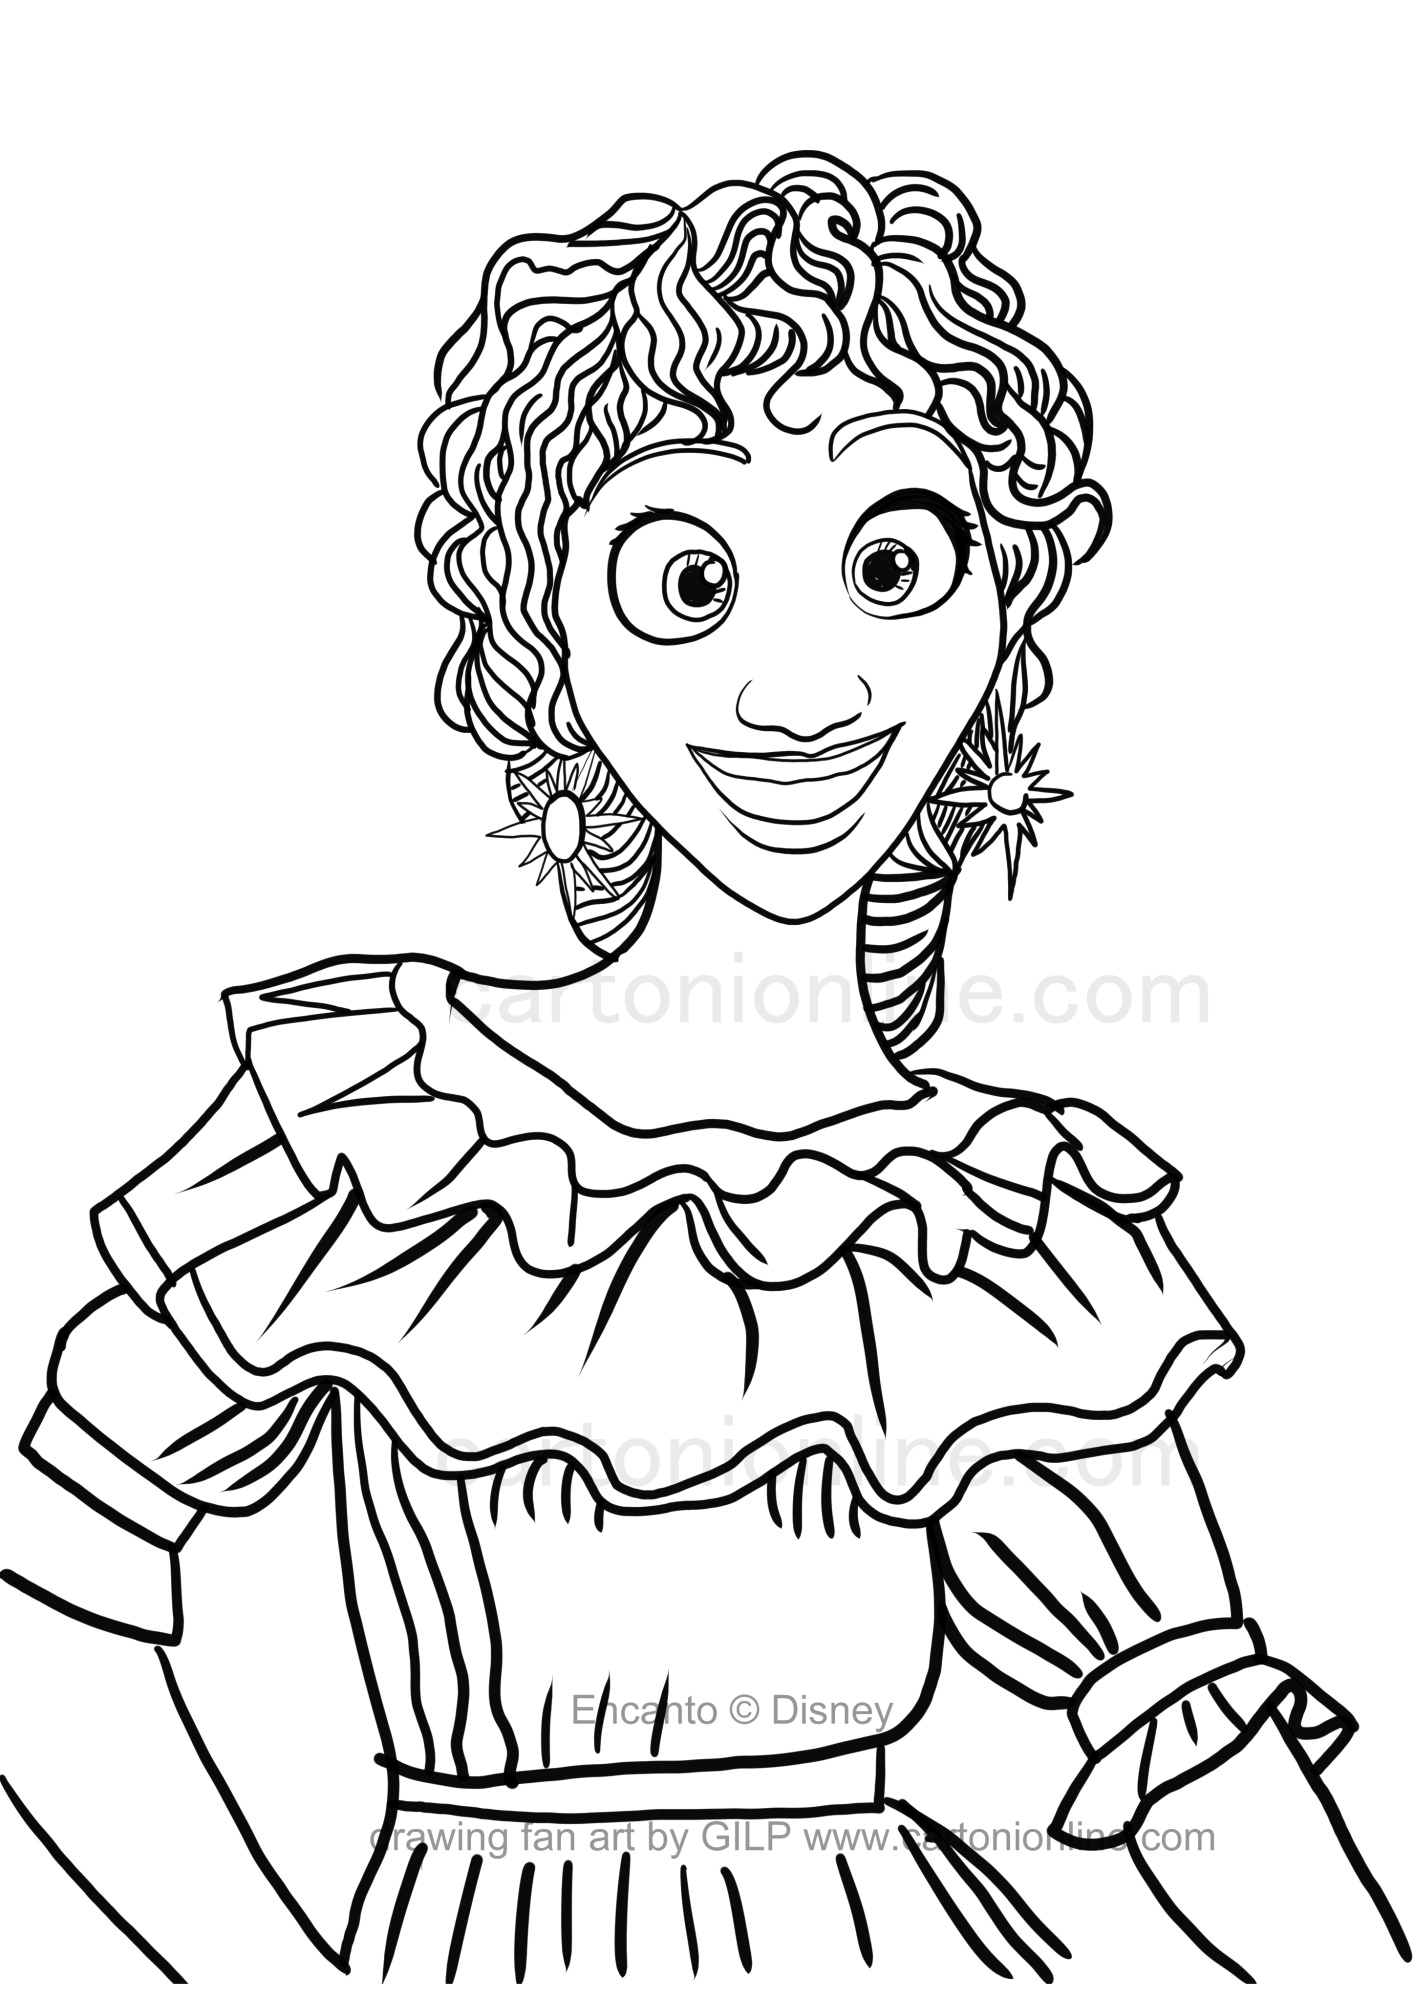 Pepa Madrigal from Encanto coloring page